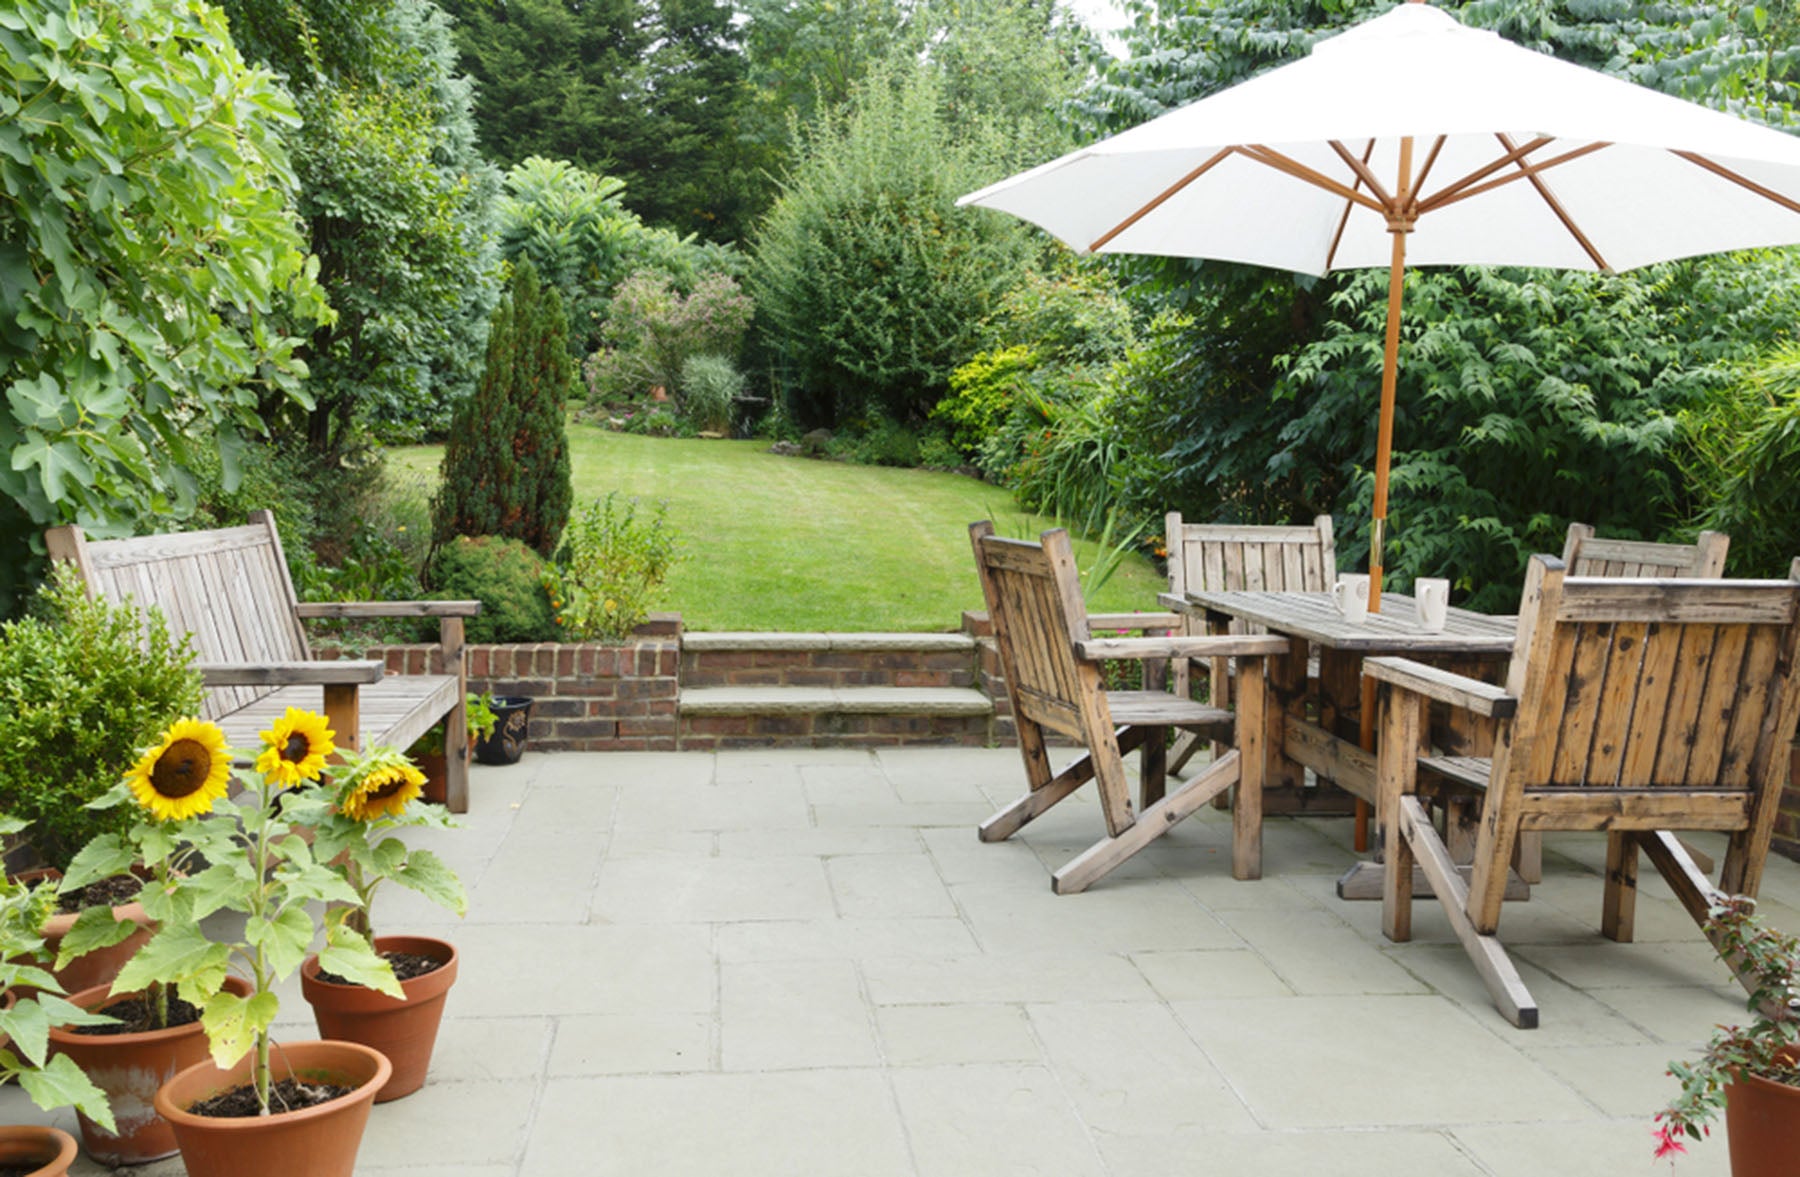 Find out how to cool patio